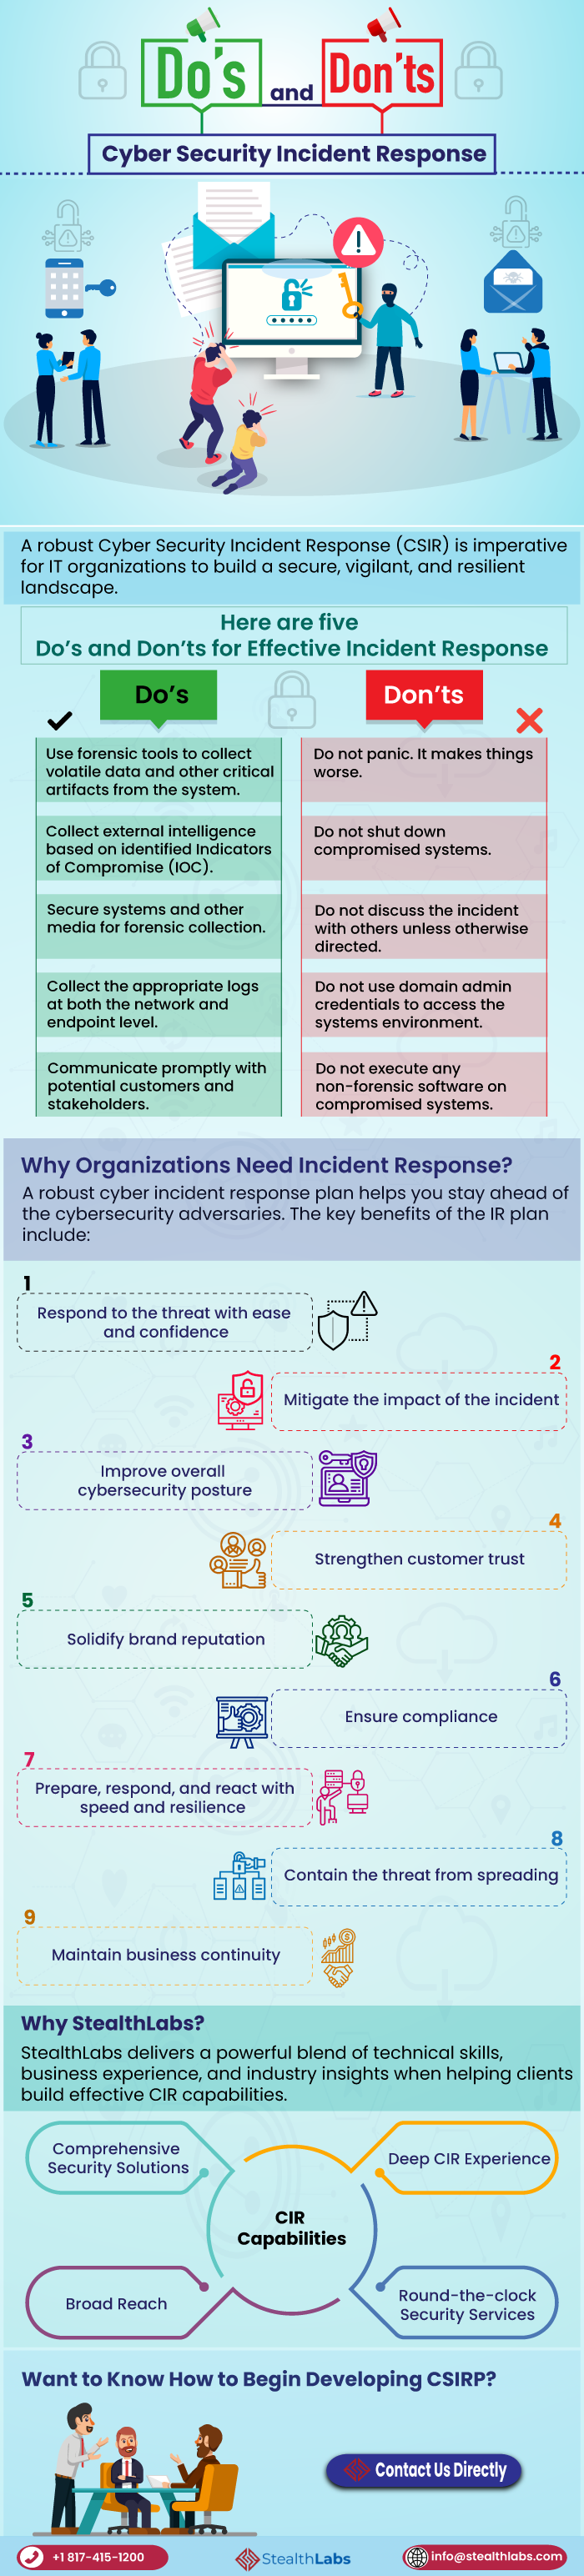 Cyber Security Incident Response: Do’s and Don’ts - Infographic